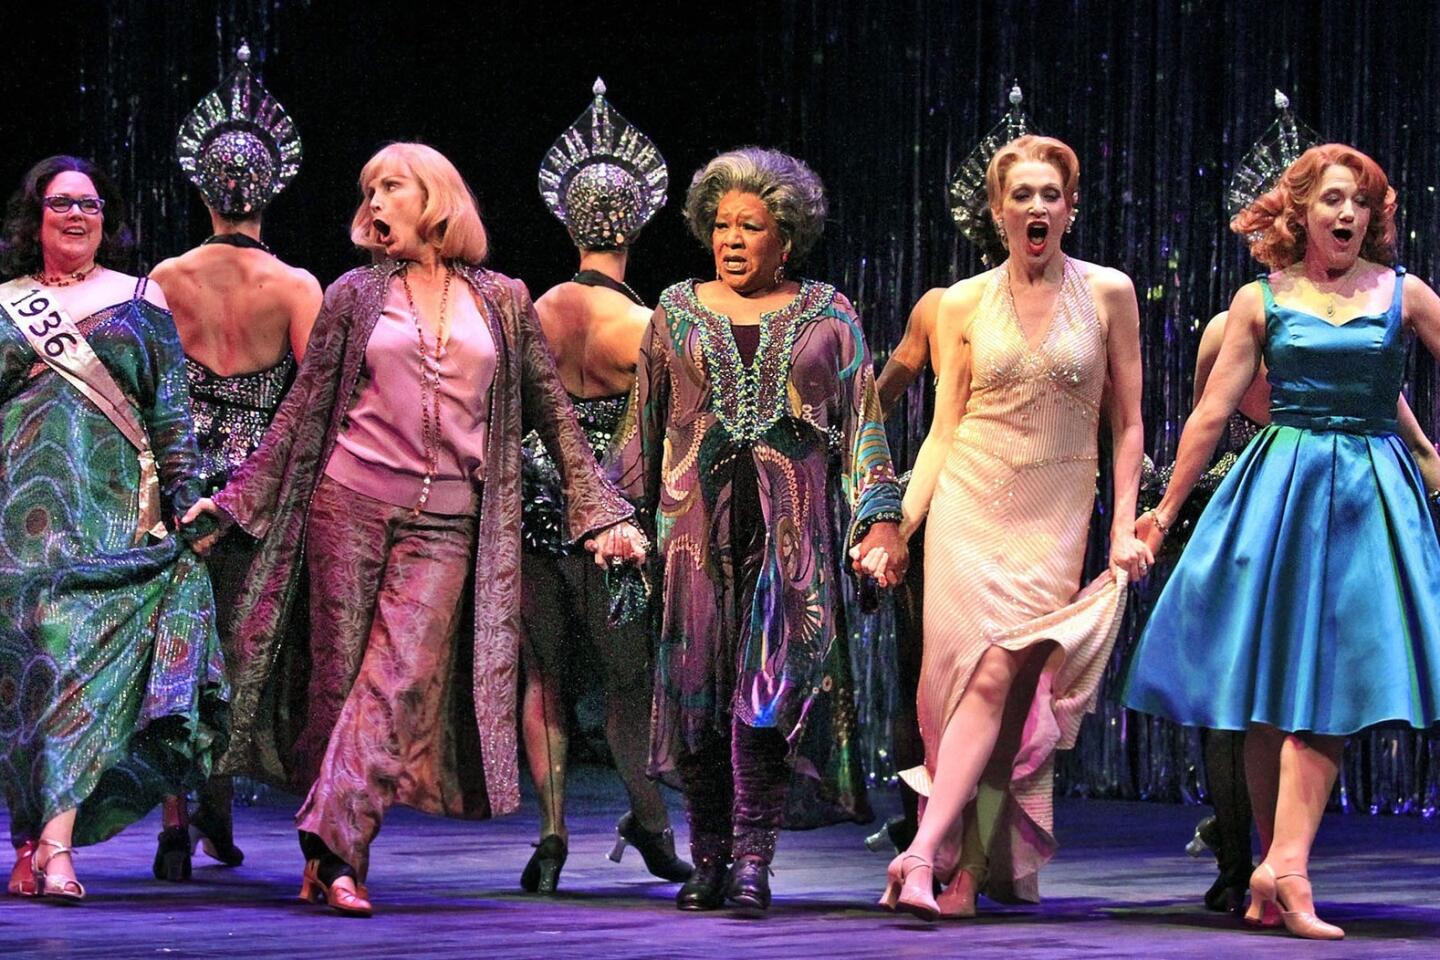 Arts and culture in pictures by The Times | 'Follies' at the Ahmanson Theatre